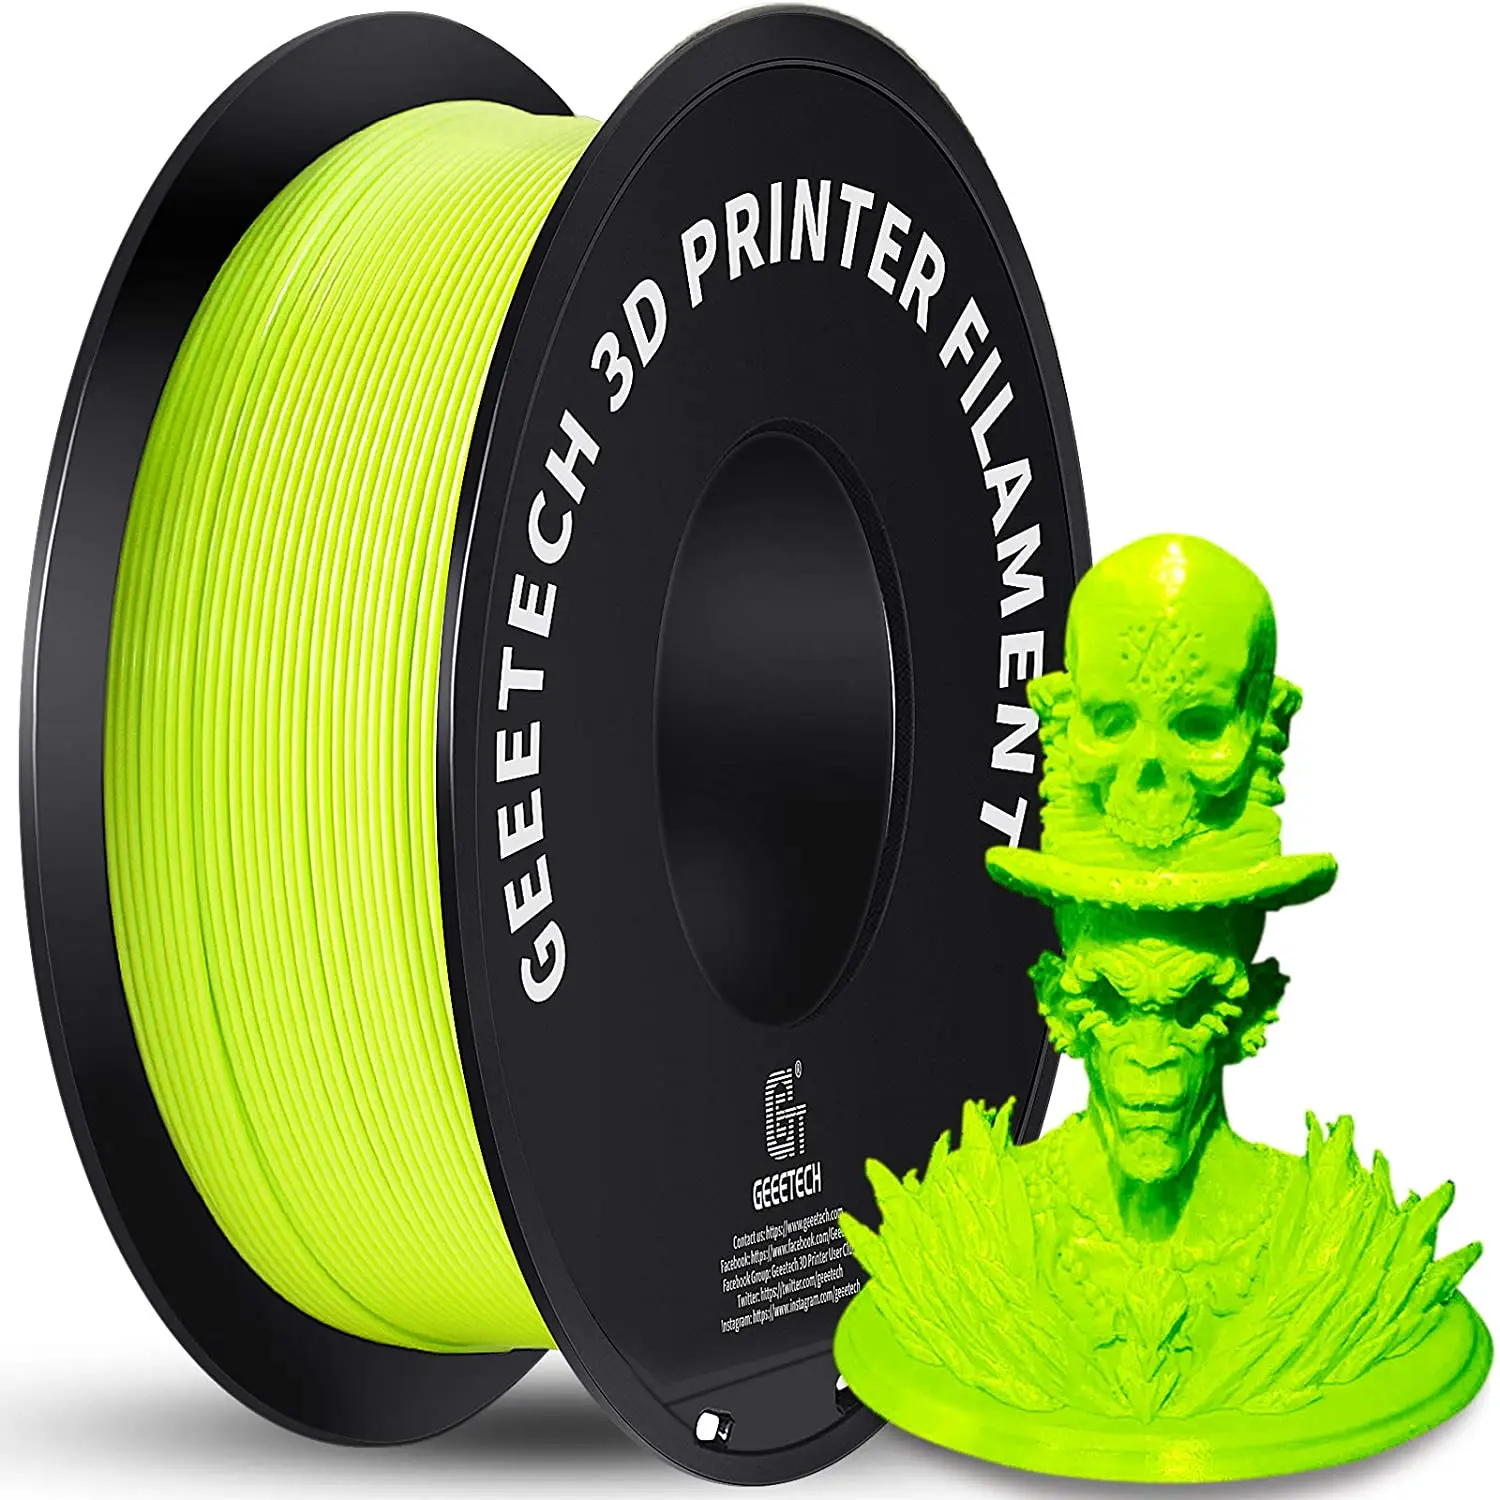 GEEETECH 1roll/1kg 1.75mm PLA Filament  Apple Green Vacuum Packaging Overseas Warehouses Various Colors For 3D Printer Fast Ship geeetech pla 1 75mm 1kg glow in dark for 3d p rinting luminous 8 colors glow pla fast shipping oversea warehouse